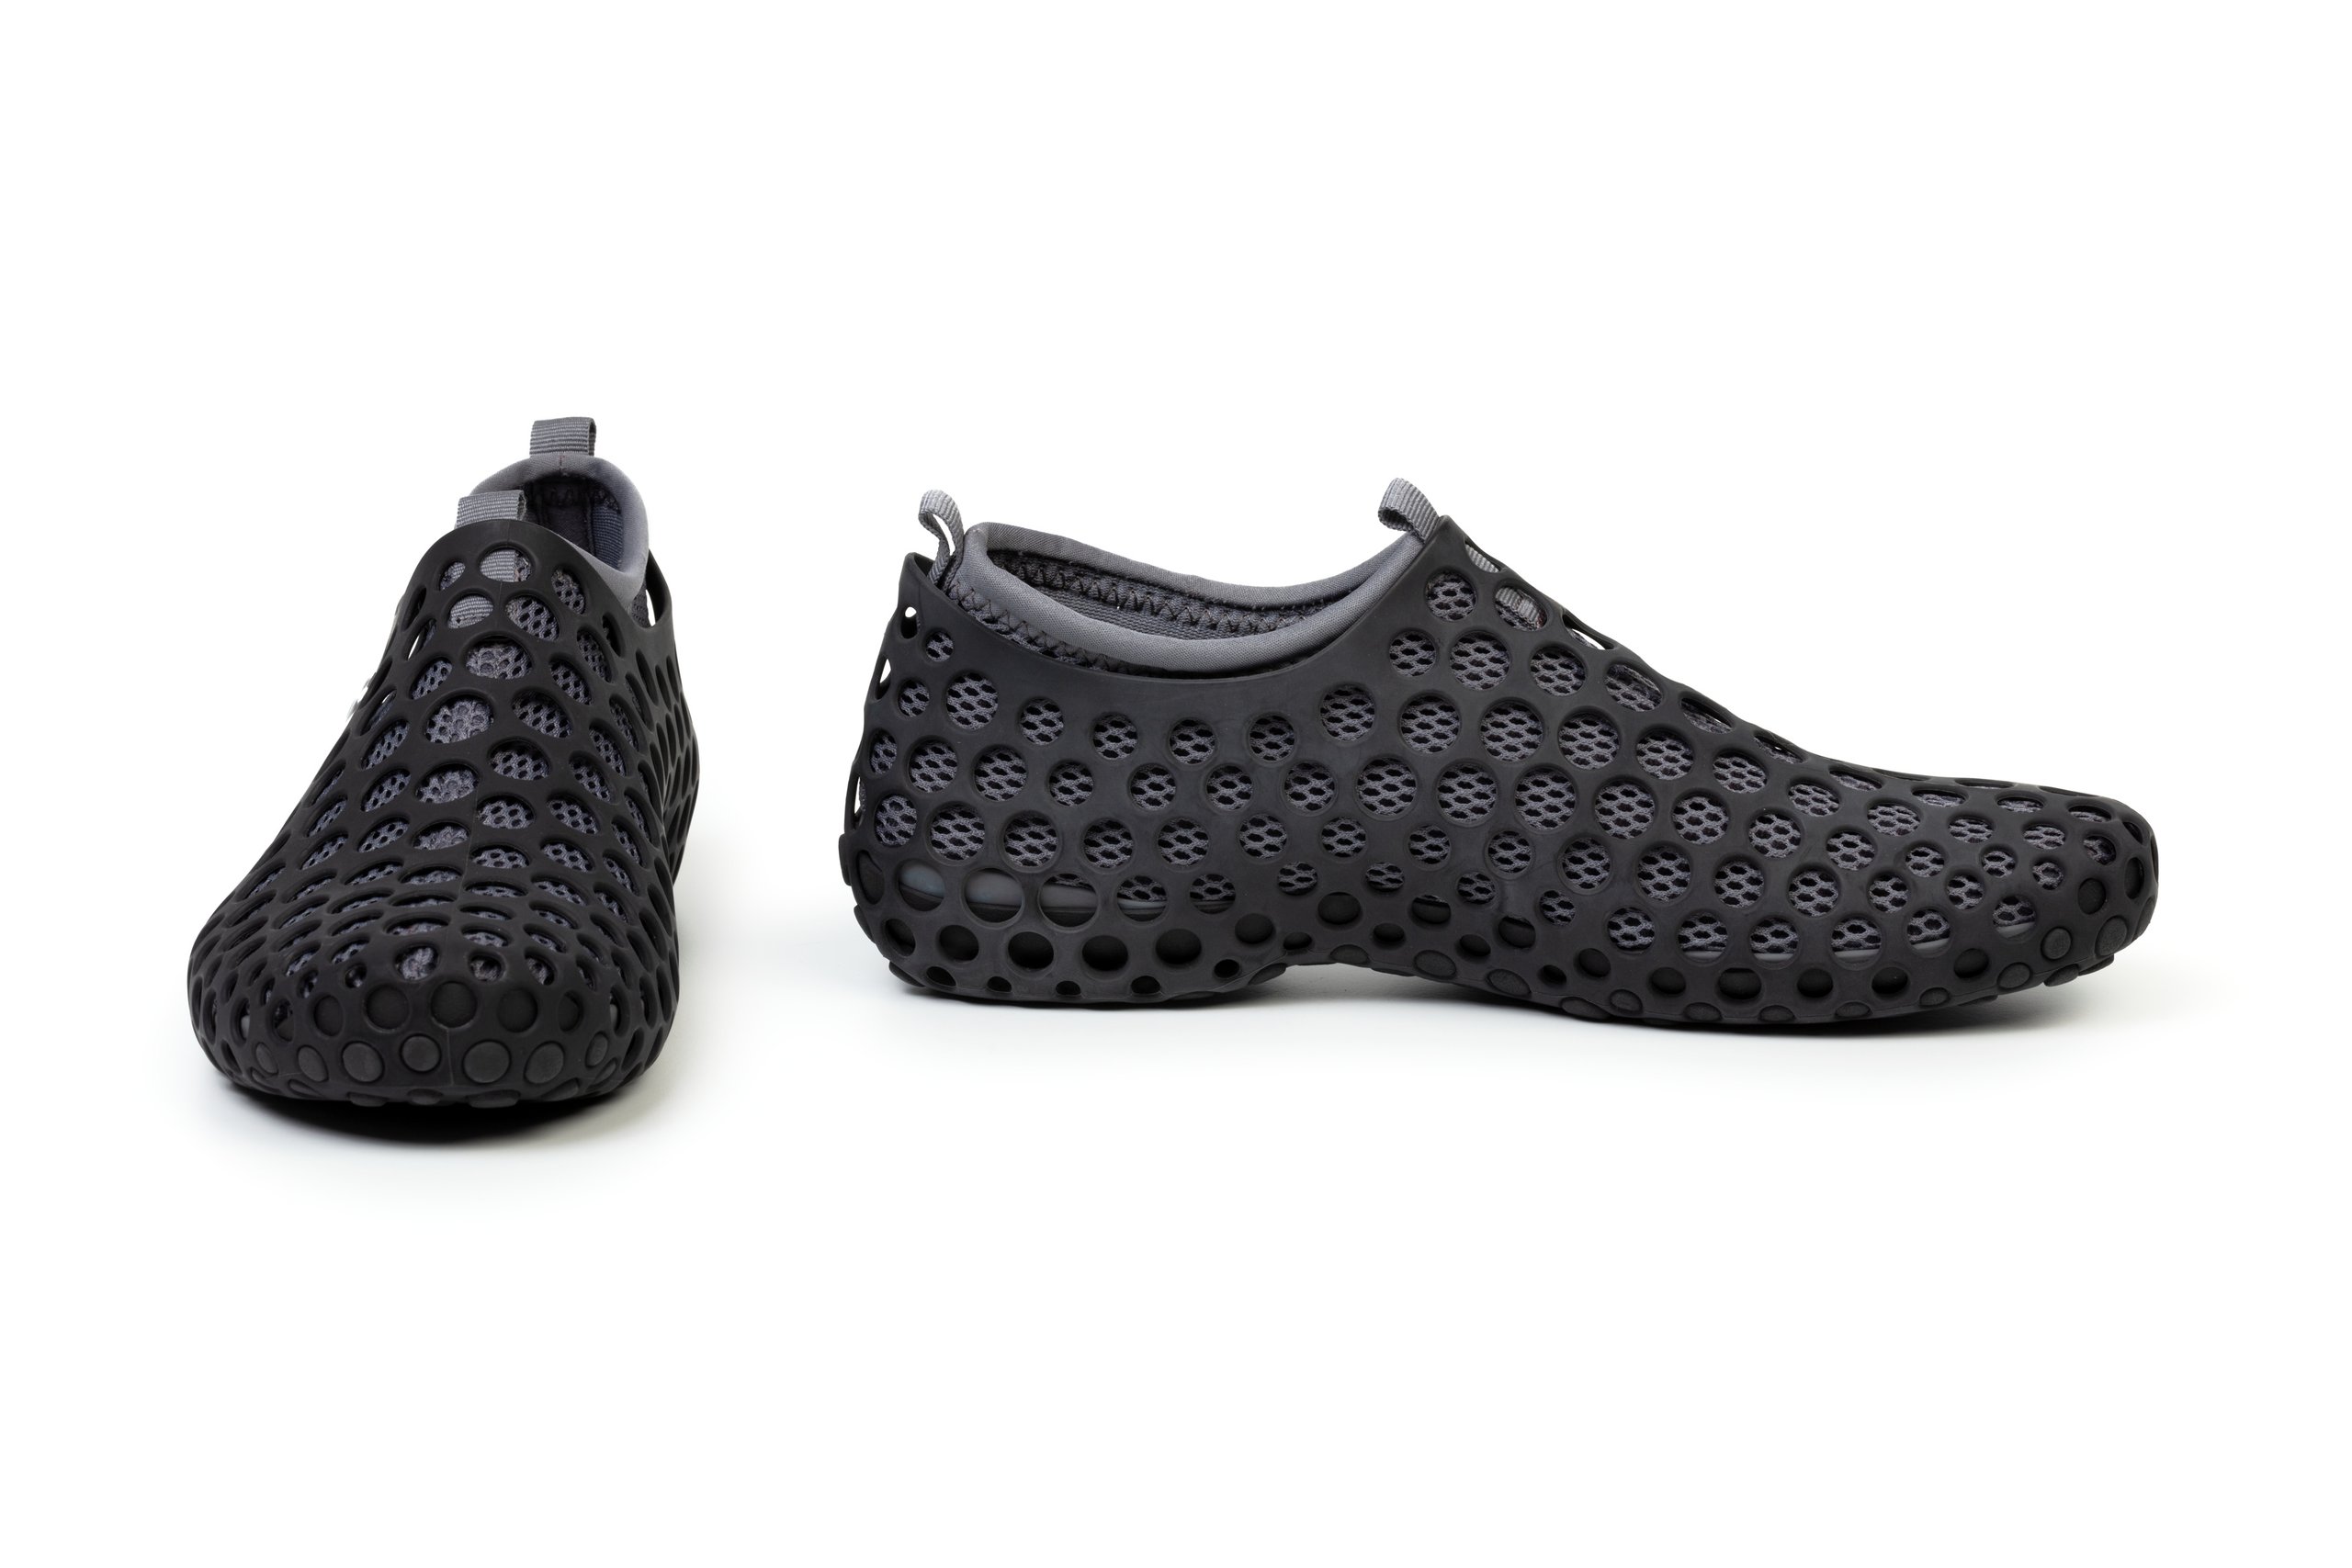 Pair of 'Zvezdochka' shoes designed by Marc Newson for Nike